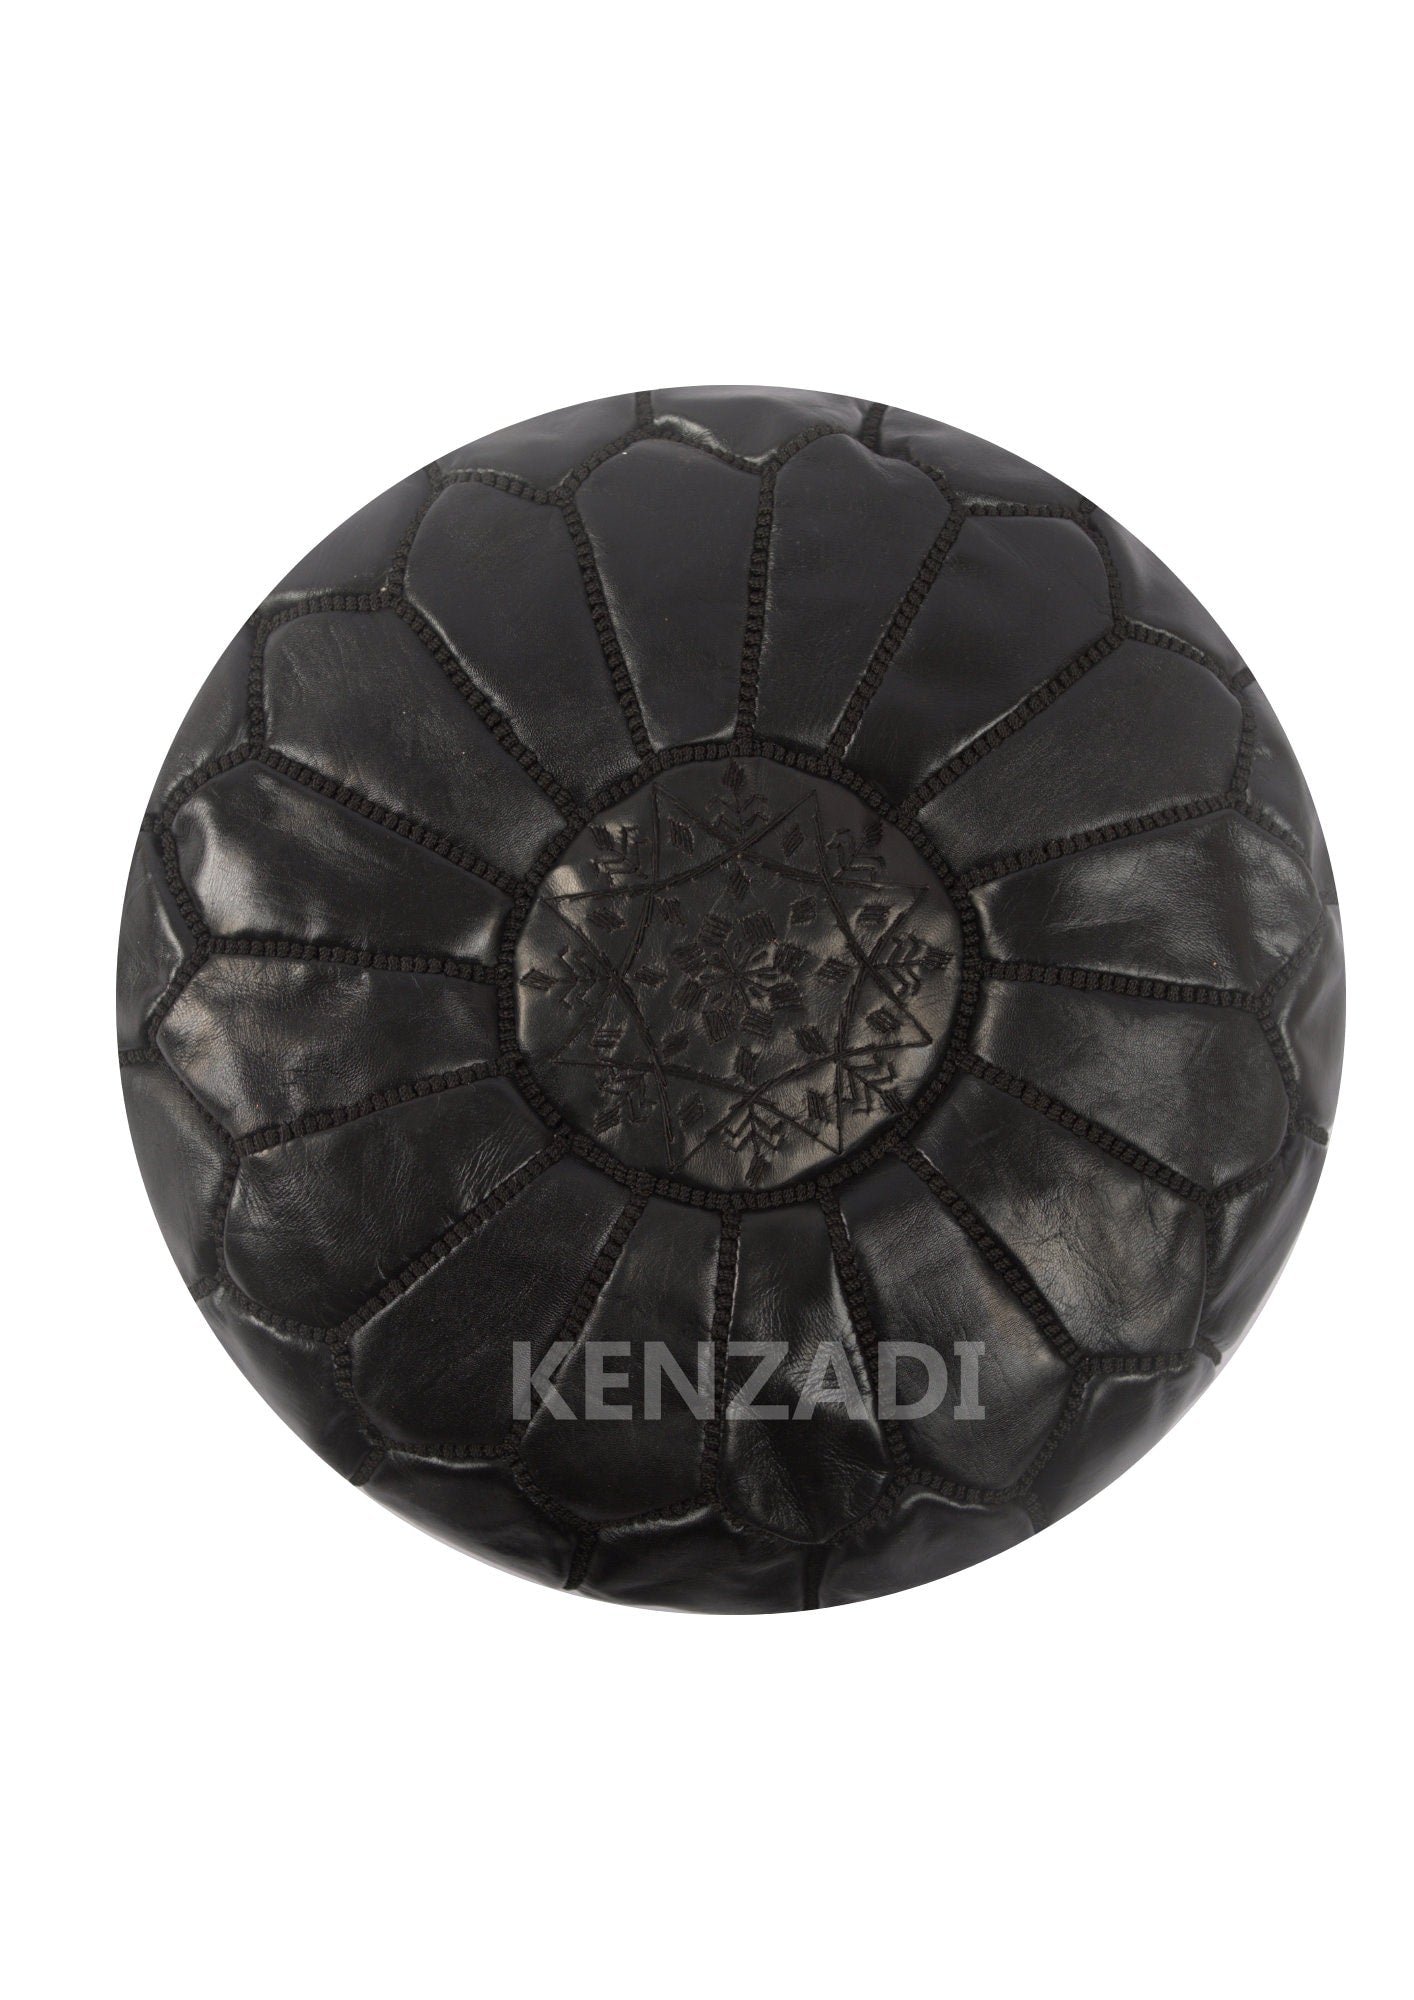 Authentic Moroccan leather pouf with black embroidery, handmade in goat leather. Black pouf with a bohemian touch, perfect for any room.